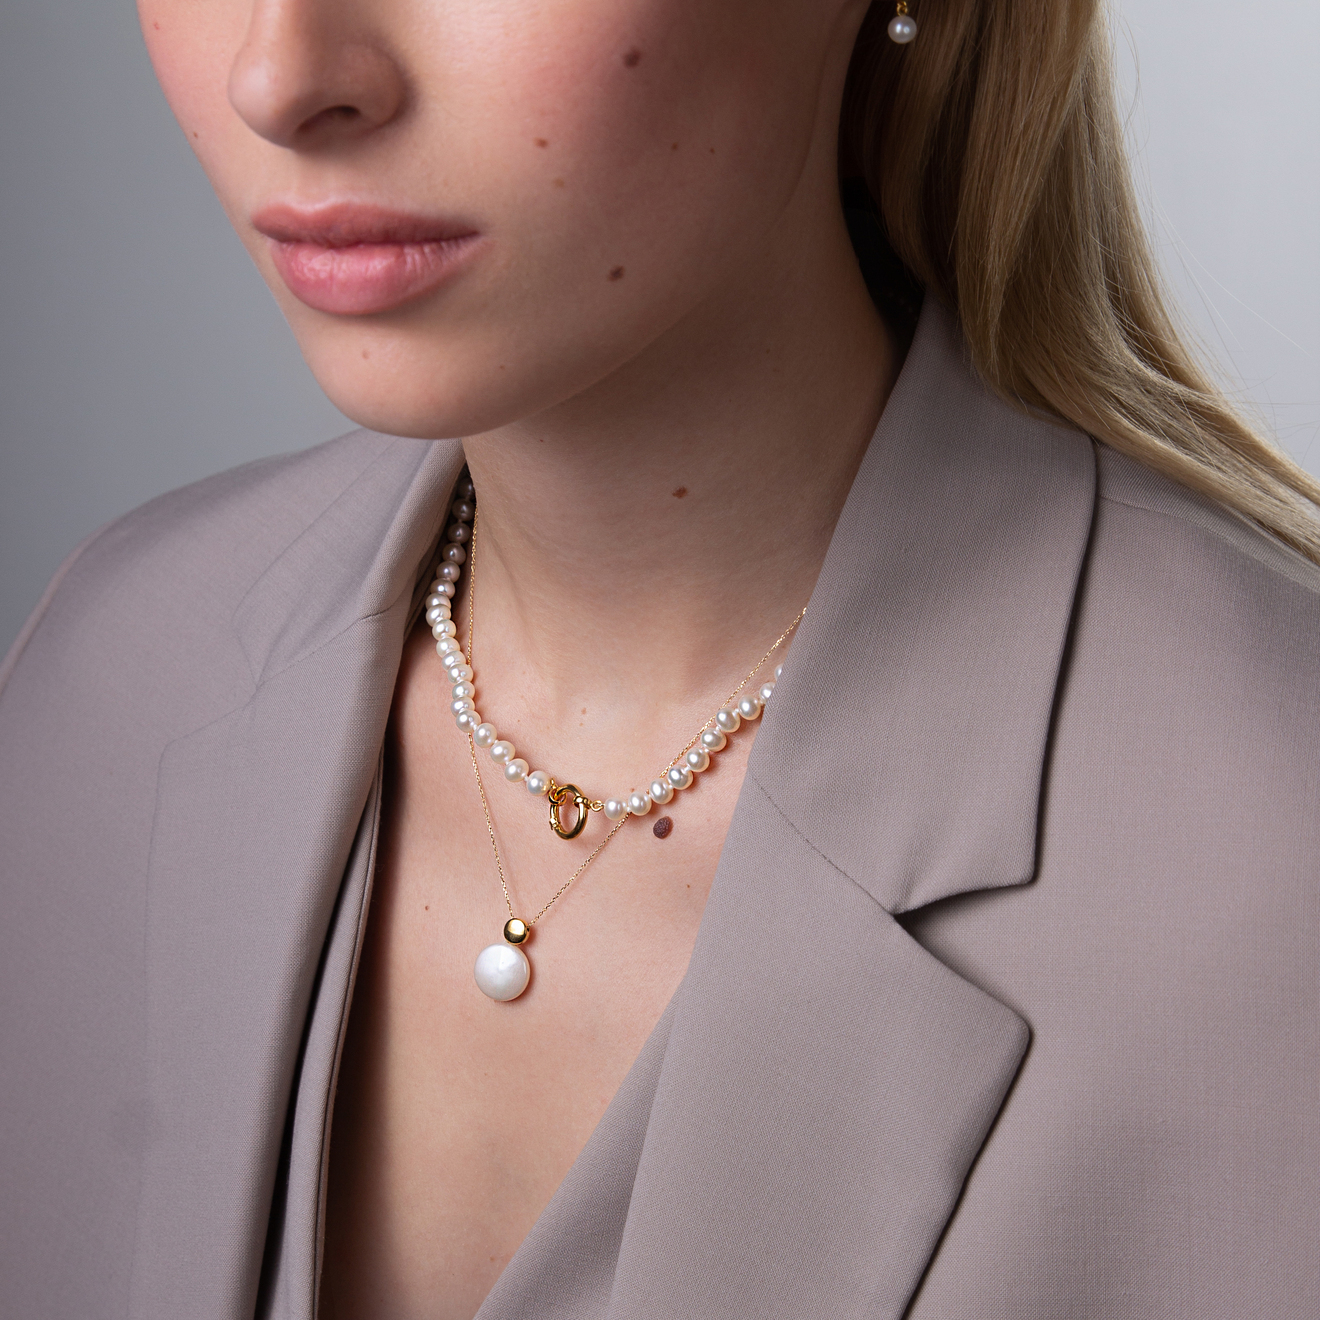 Hold necklace made of pearls and gold – buy at Poison Drop online store,  SKU